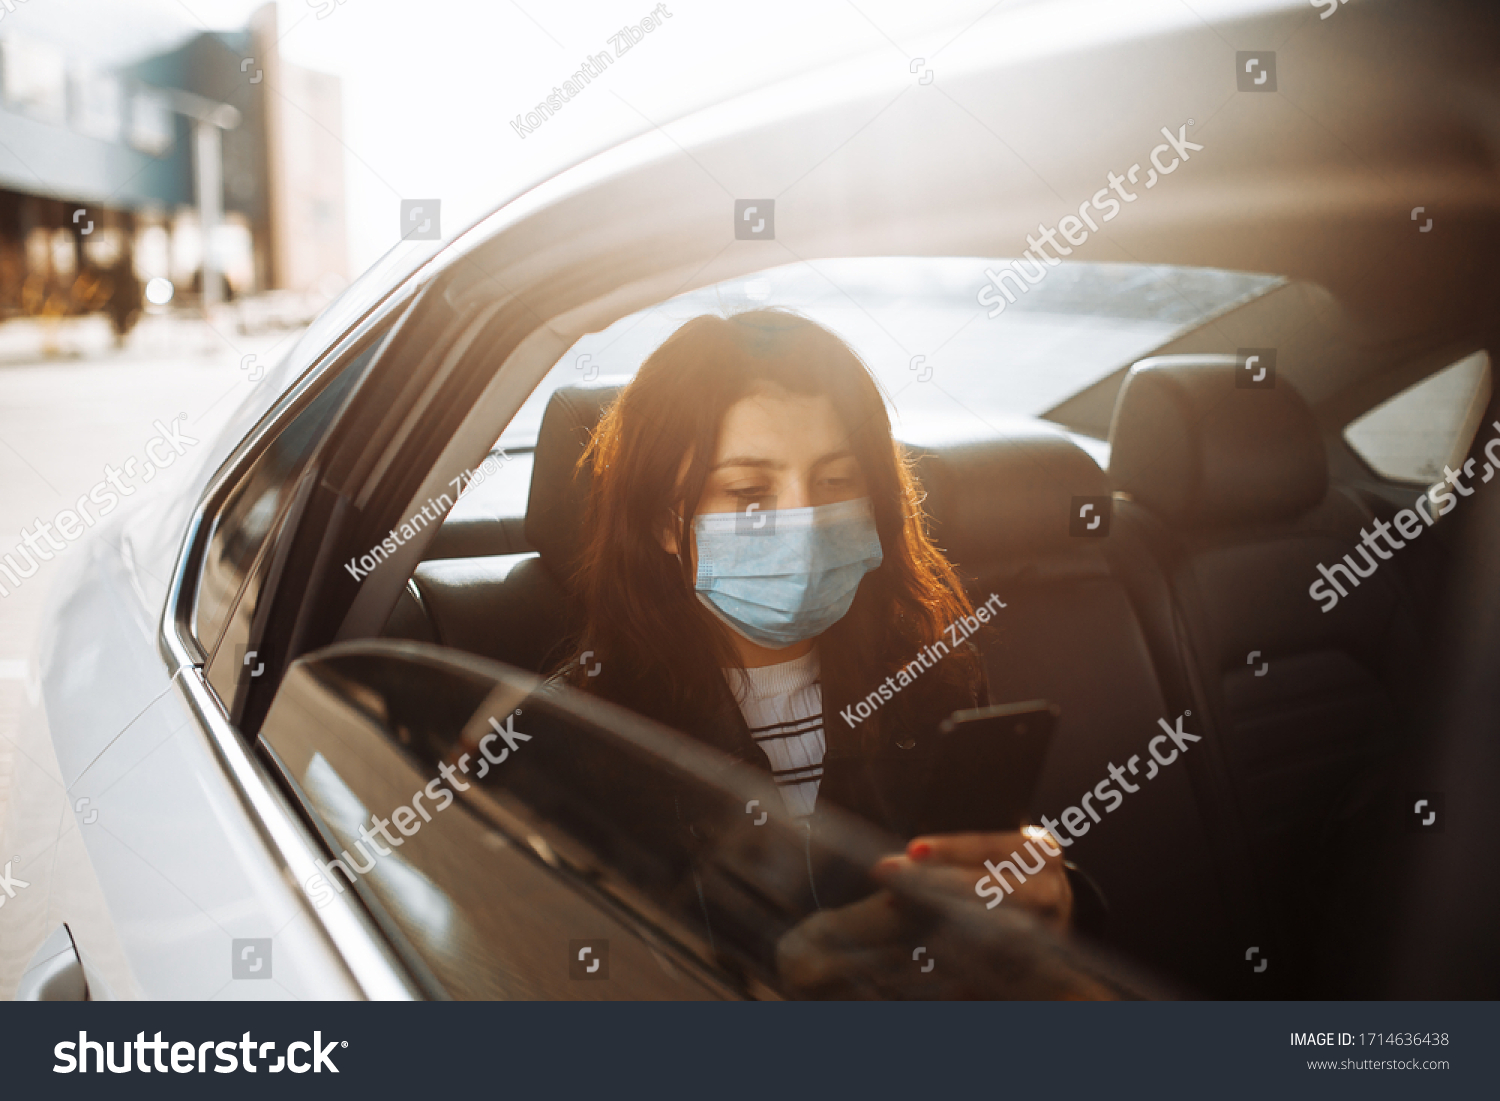 Woman wearing a medical sterile mask in taxi car on a backseat looking out of window checking her cell phone. Girl passenger waiting in a traffic jam during coronavirus quarantine. Healthcare concept #1714636438